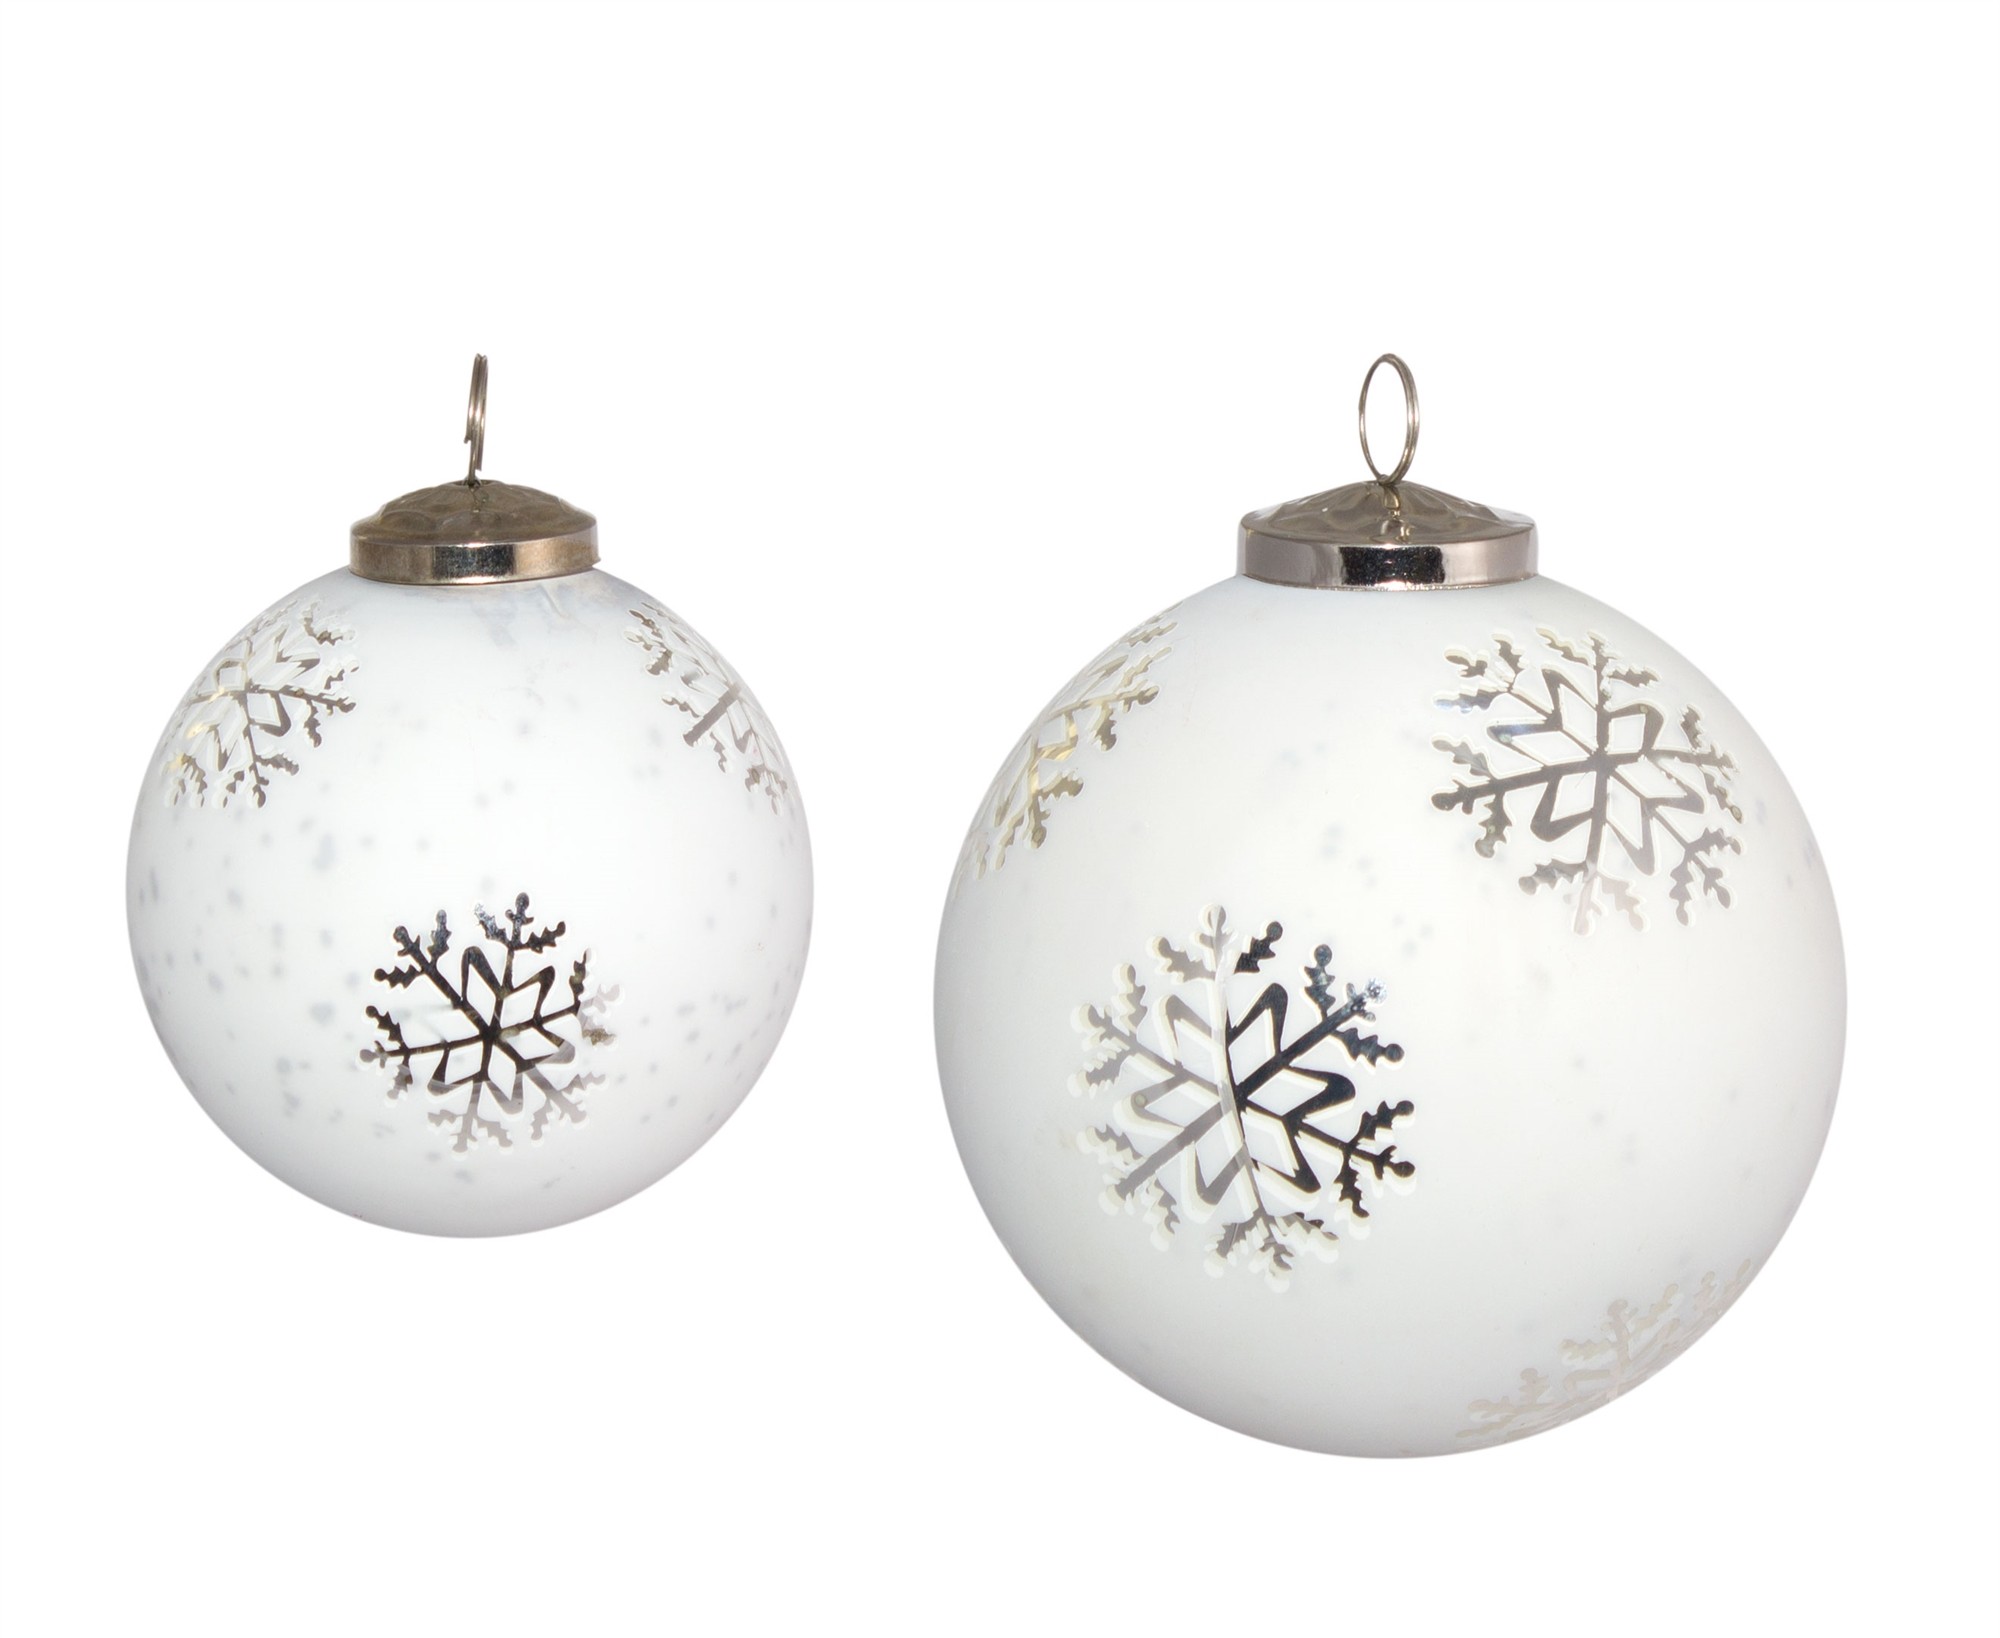 Ball with Snowflake (Set of 2) 4.75"H, 6"H Glass